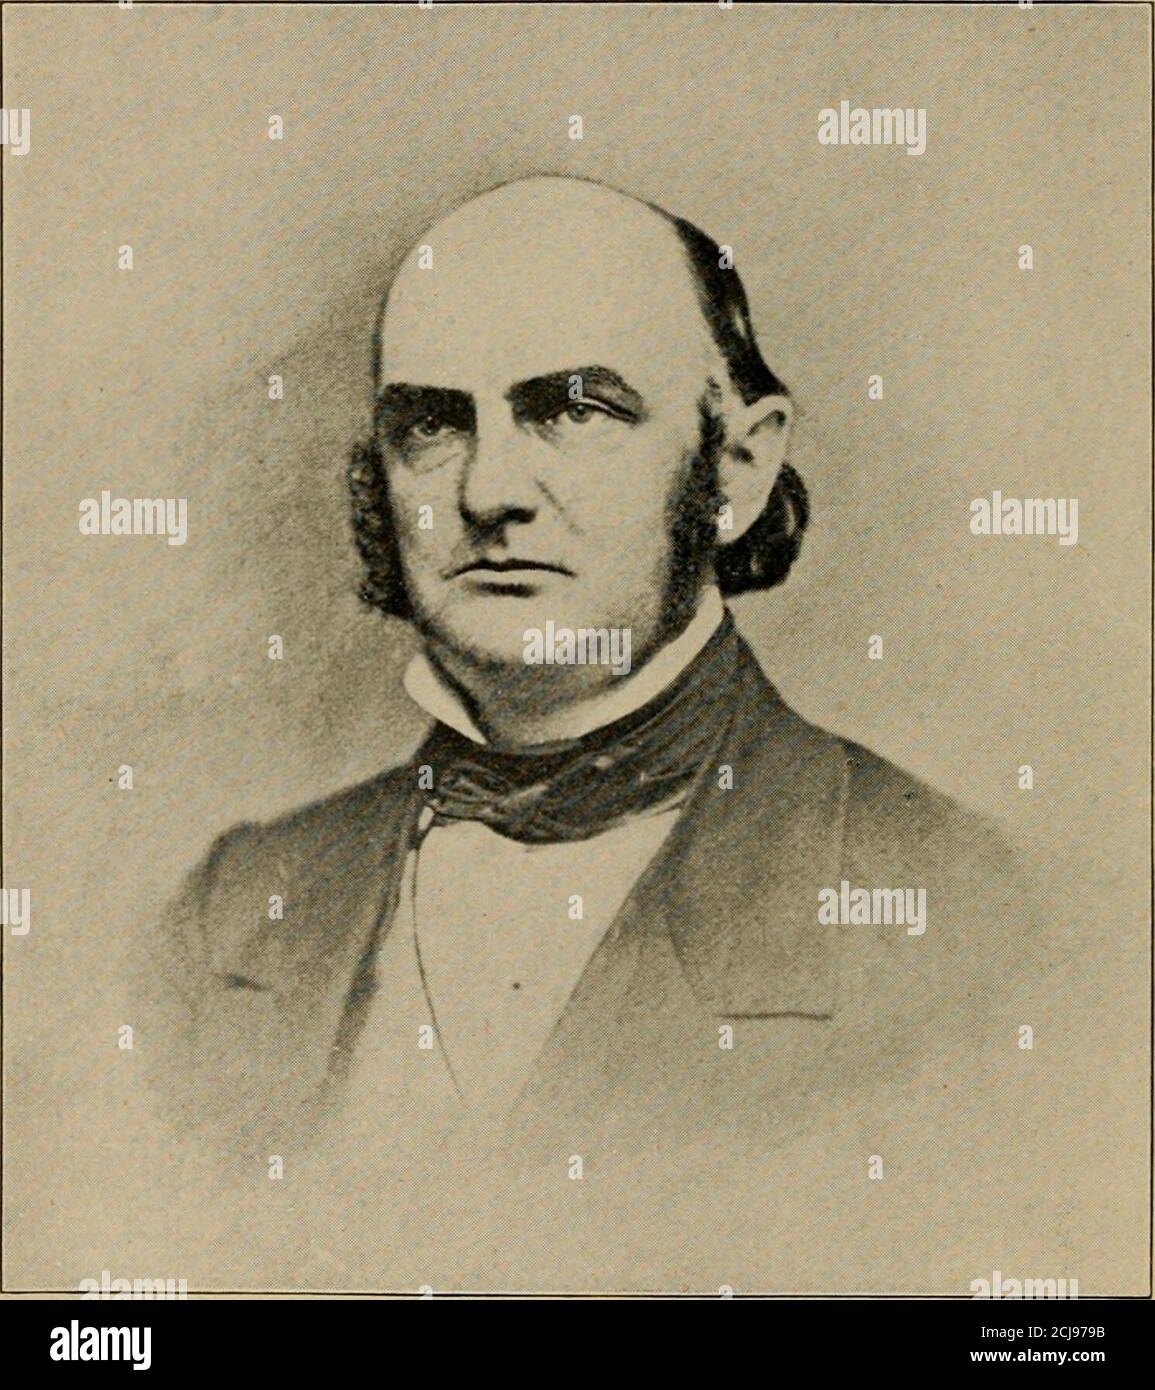 . Civil War messages and proclamations of Wisconsin war governors . CIVIL WAR MESSAGES ANDPROCLAMATIONS. Governor Alexander W. Randall From a photograph taken during the War Xt^r Wisconsin History Commission: Reprints, No. 2 CIVIL WAR MESSAGES AND PROCLAMATIONS OF WISCONSIN WAR GOVERNORS USiAt EDITED BY REUBEN GOLD THWAITES In collaboration with Asa Currier Tilton and Frederick MEnH&gt;: WISCONSIN HISTORY COMMISSIONDECEMBER, 1912 rt Stock Photo